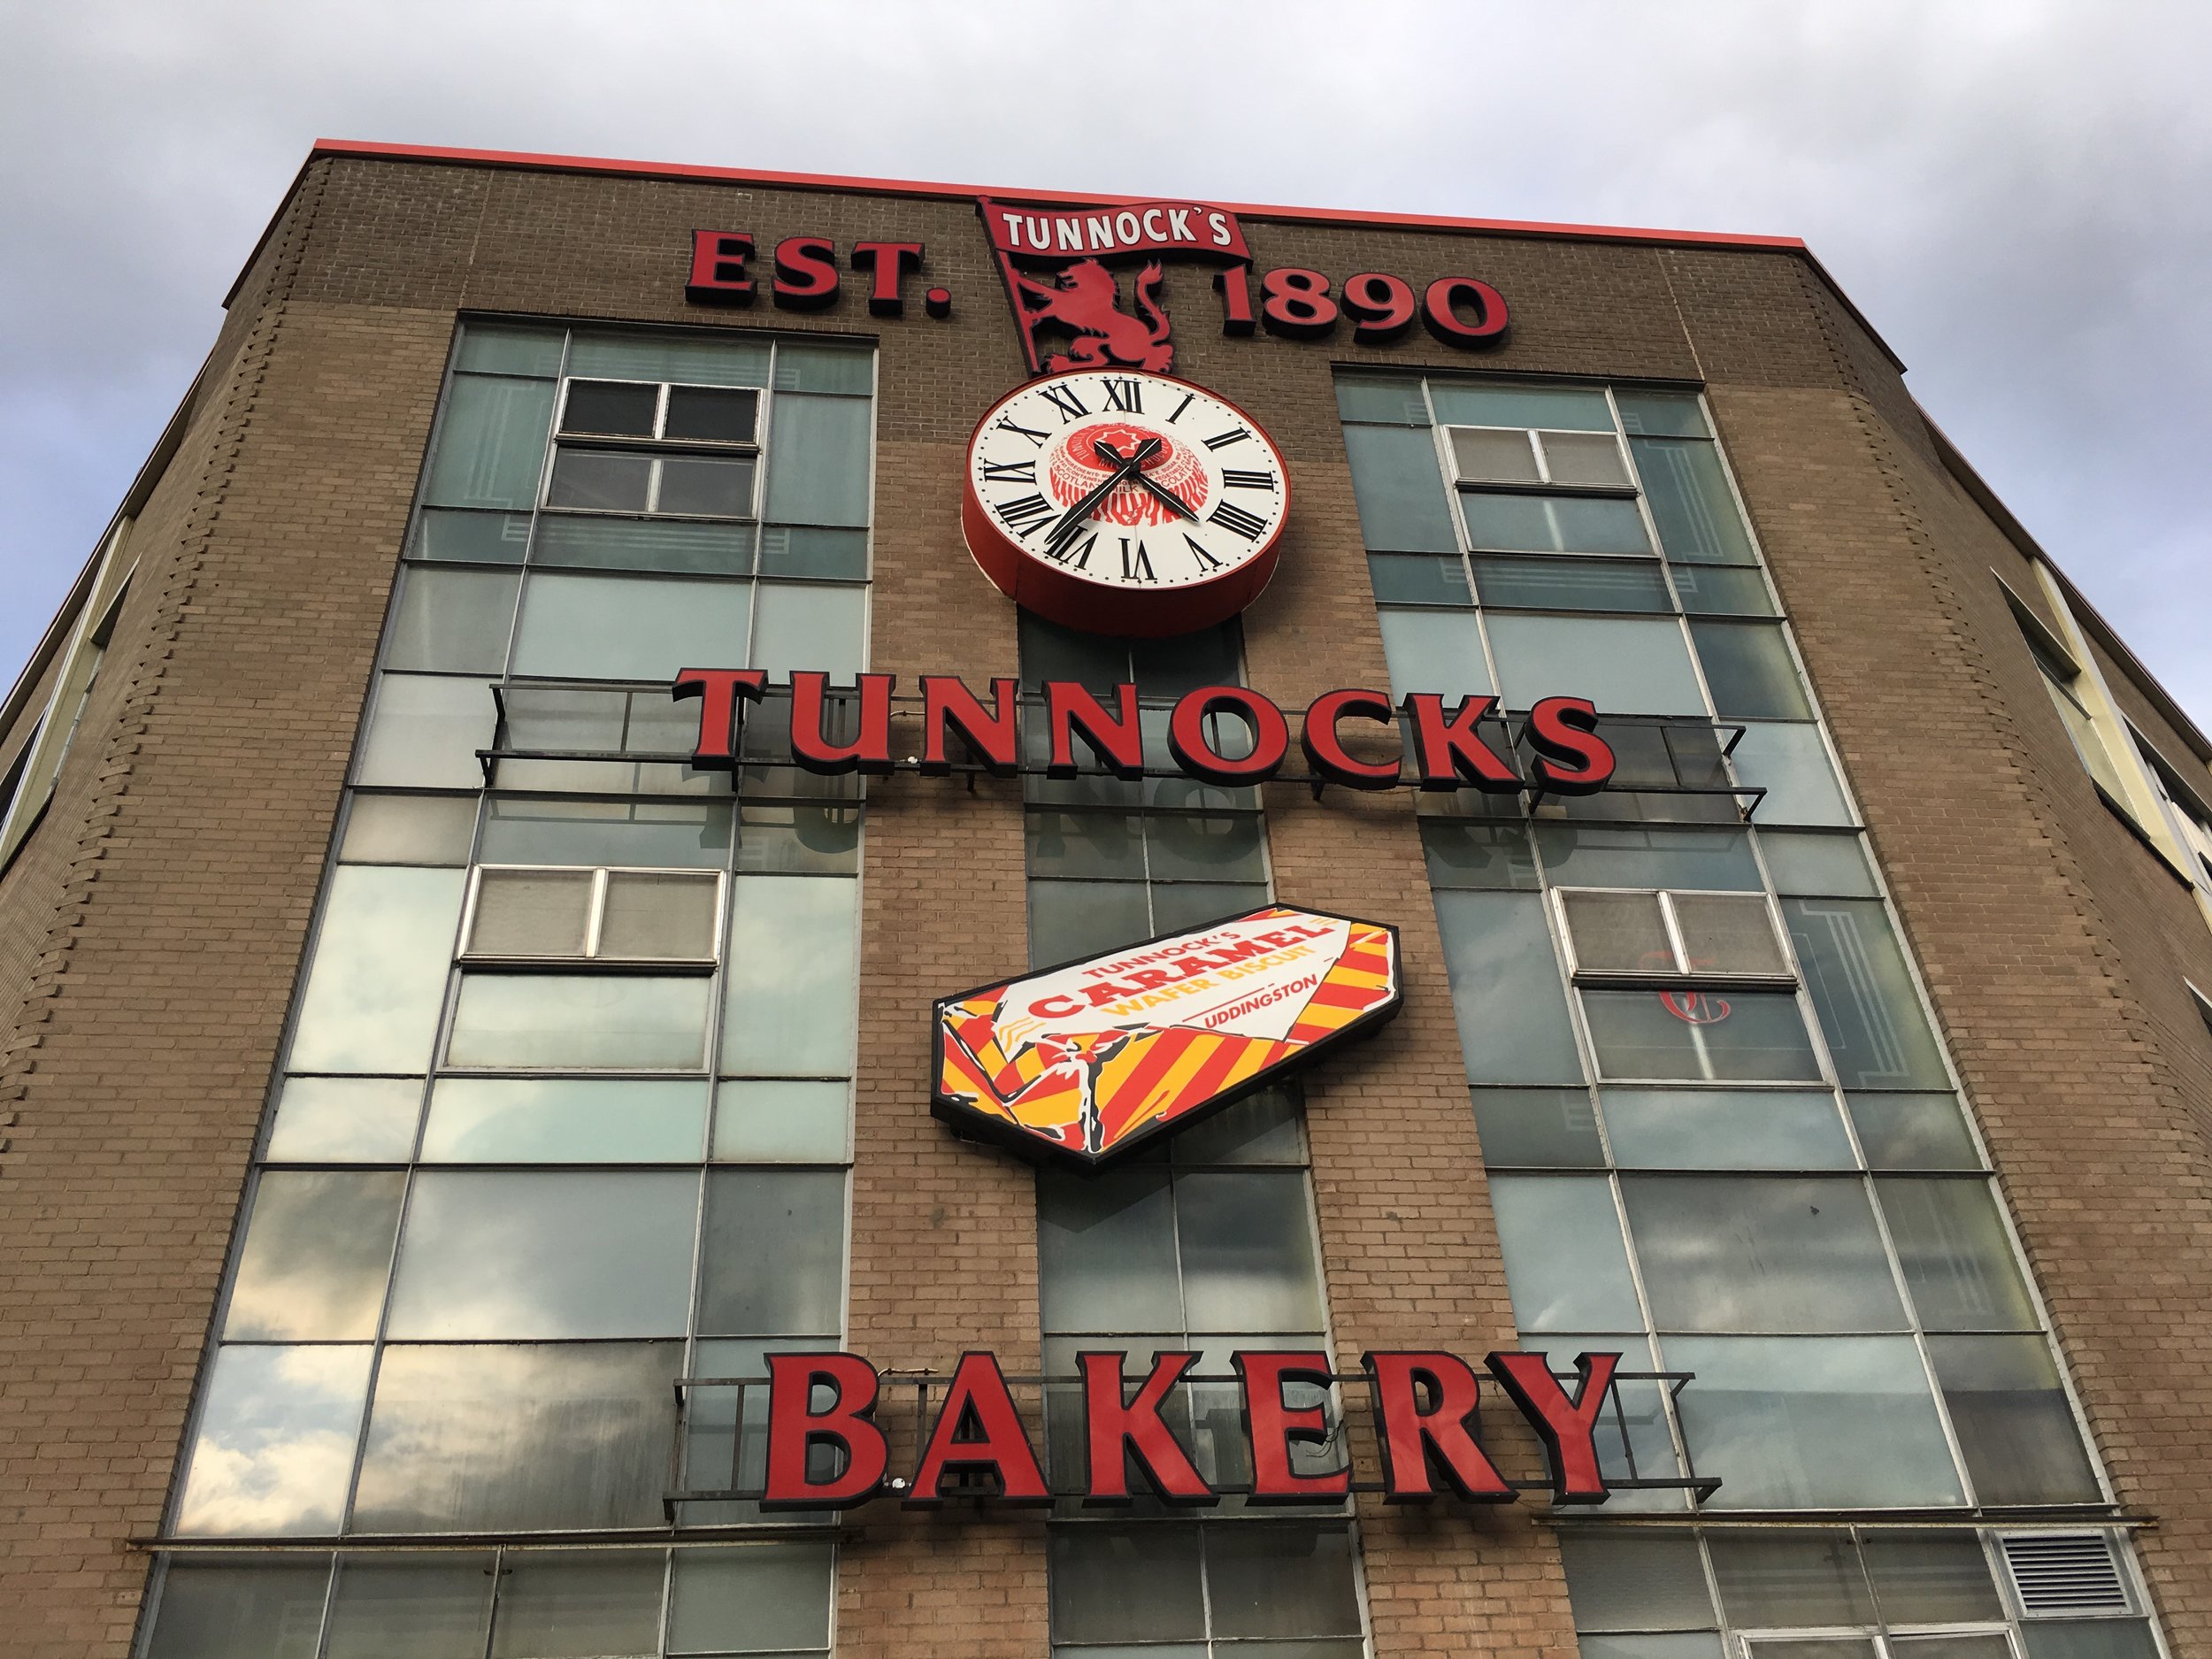 The Tunnocks factory in Uddingston, Scotland. My first home :)